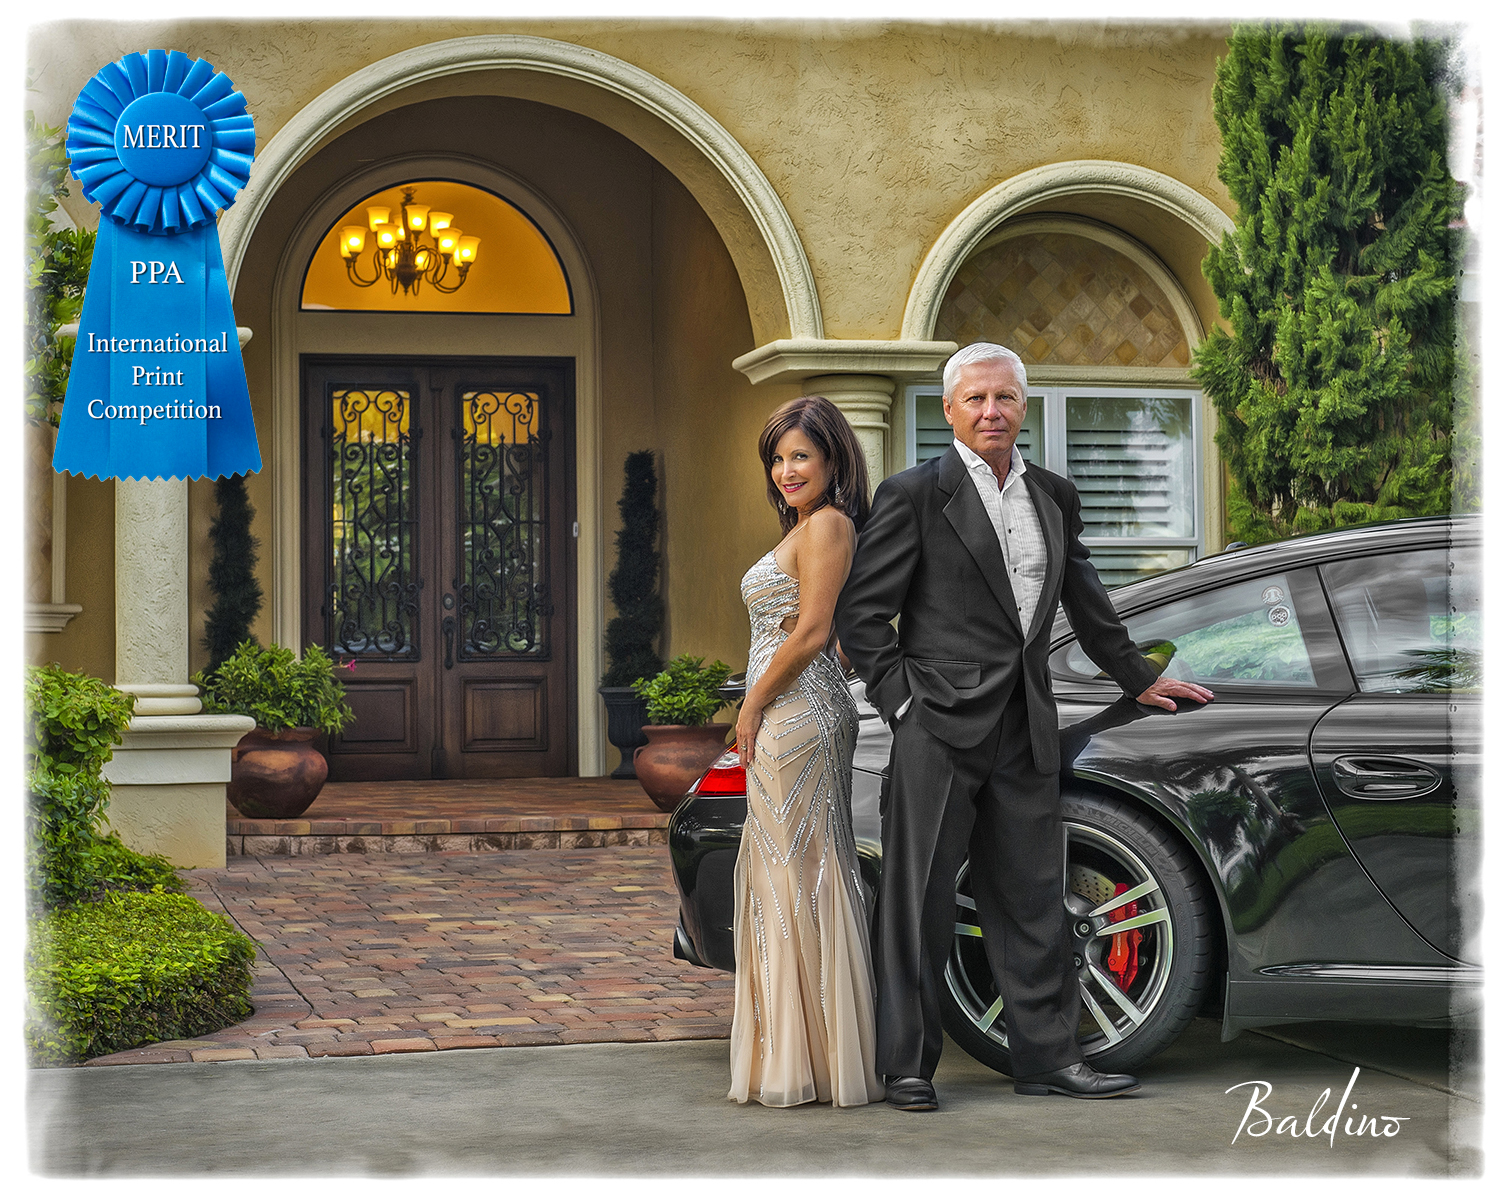 This_is_a_photograph_of_a_man_and_woman_with_their_car. It_is_a_formal_portrait_in_front_of_their_luxurious_home. The_woman_is_wearing_a_gown.